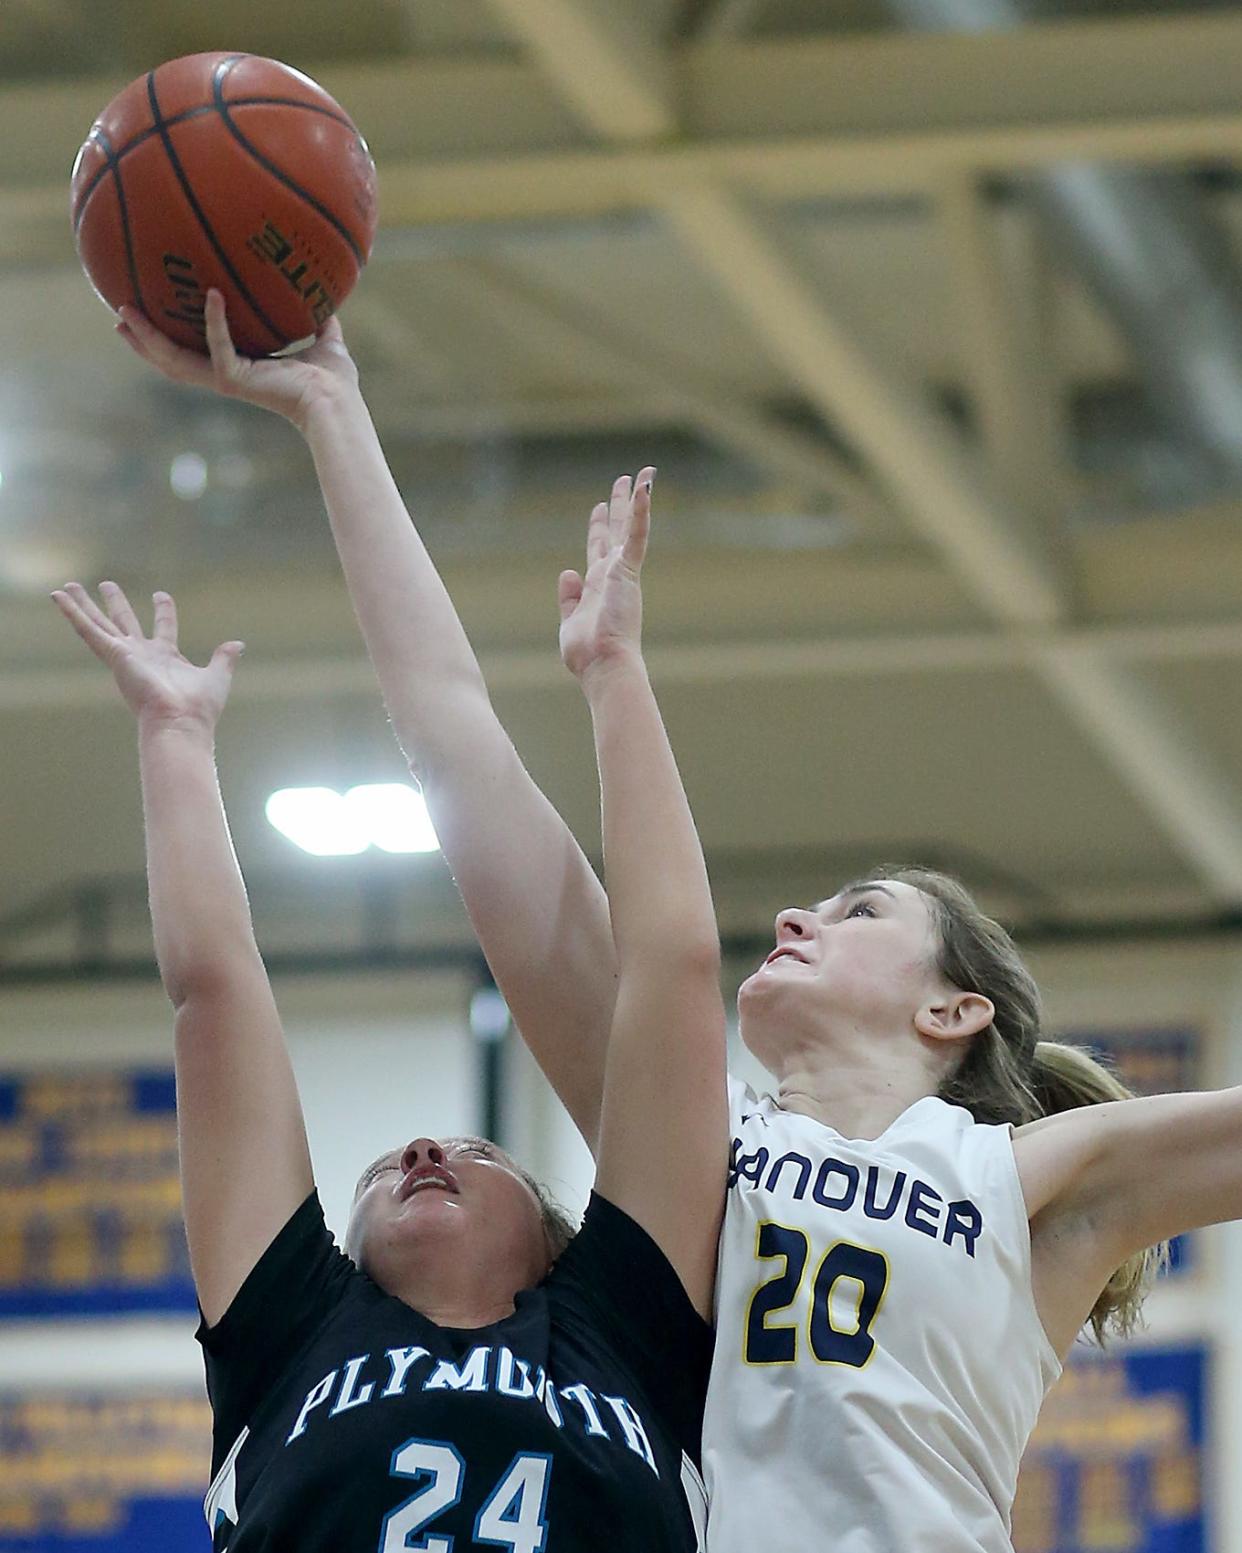 Hanover's Mary Kate Flynn grabs the rebound over Plymouth South's Abby Diamond during second quarter action of their game against Plymouth South at Hanover High on Friday, Feb. 3, 2023. 